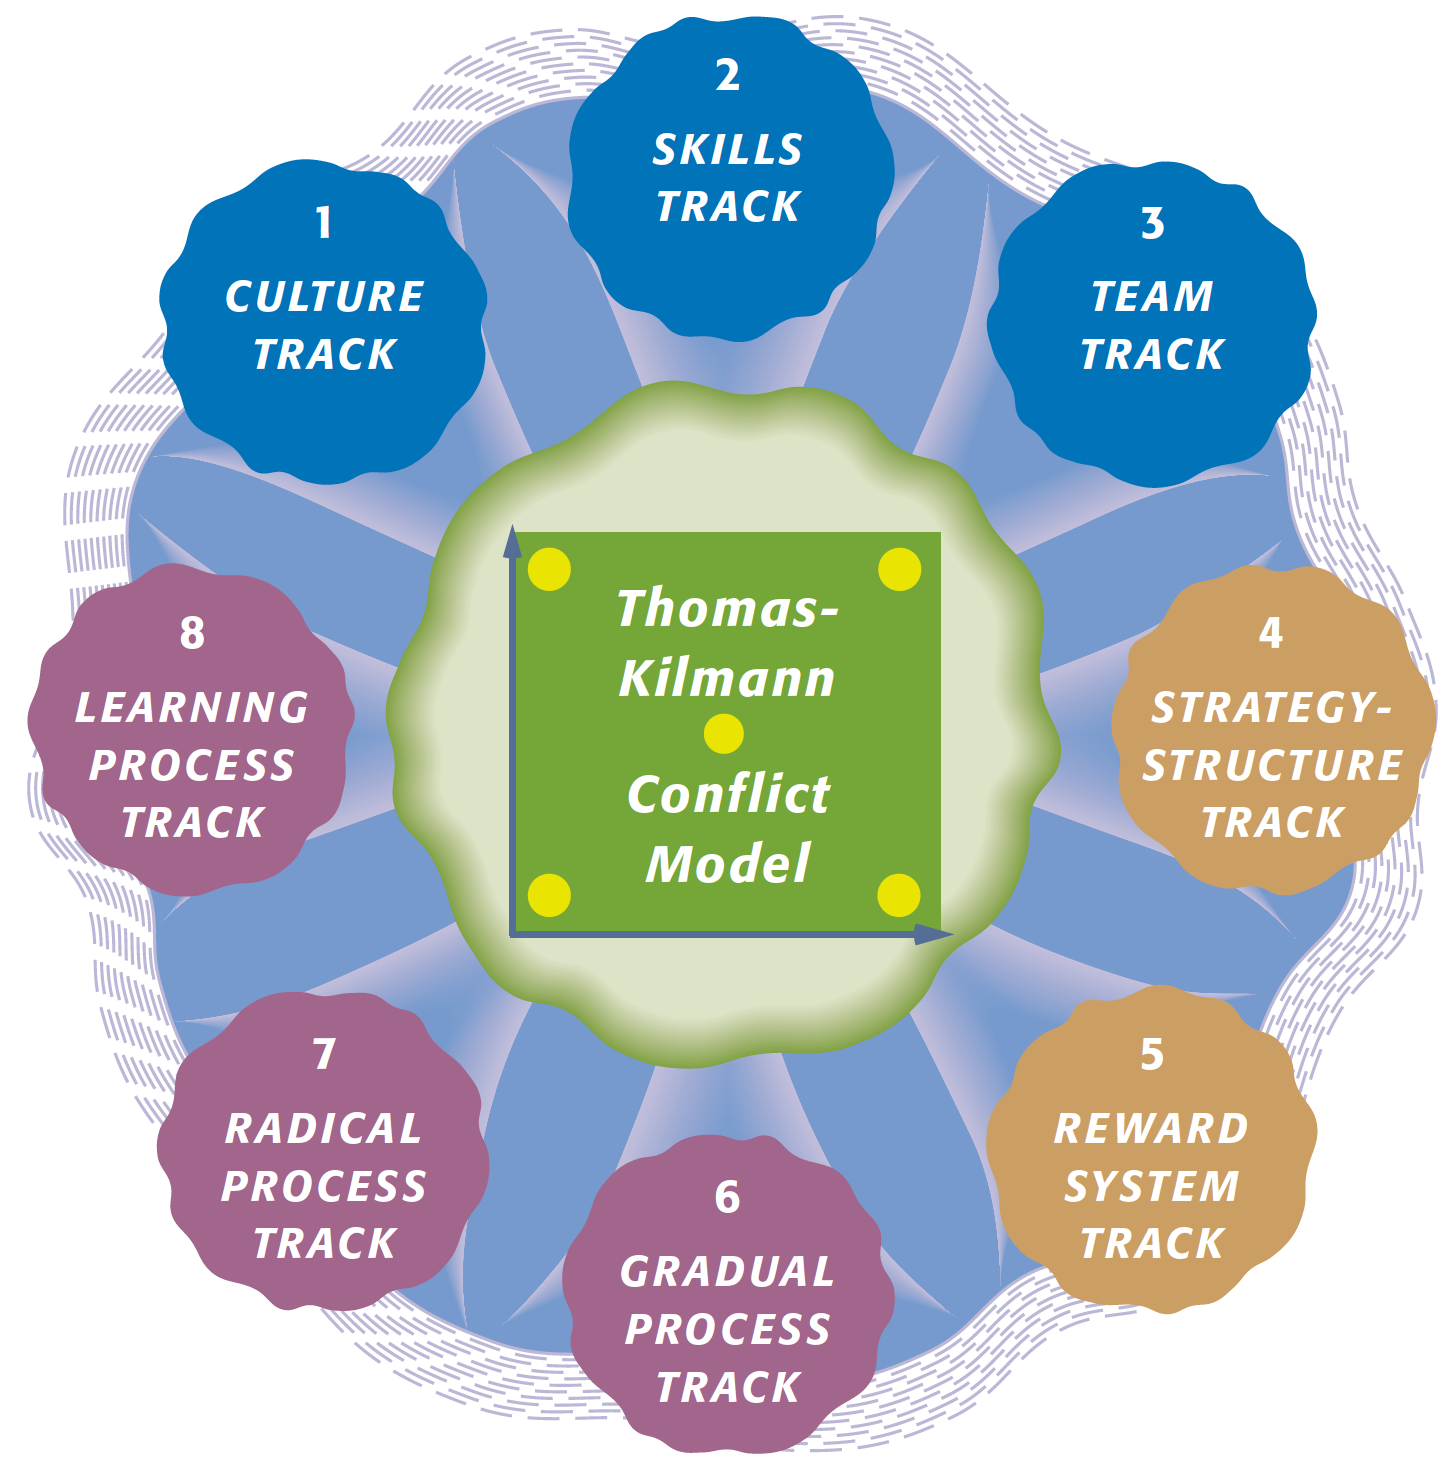 The Eight Tracks and the TKI Conflict Model